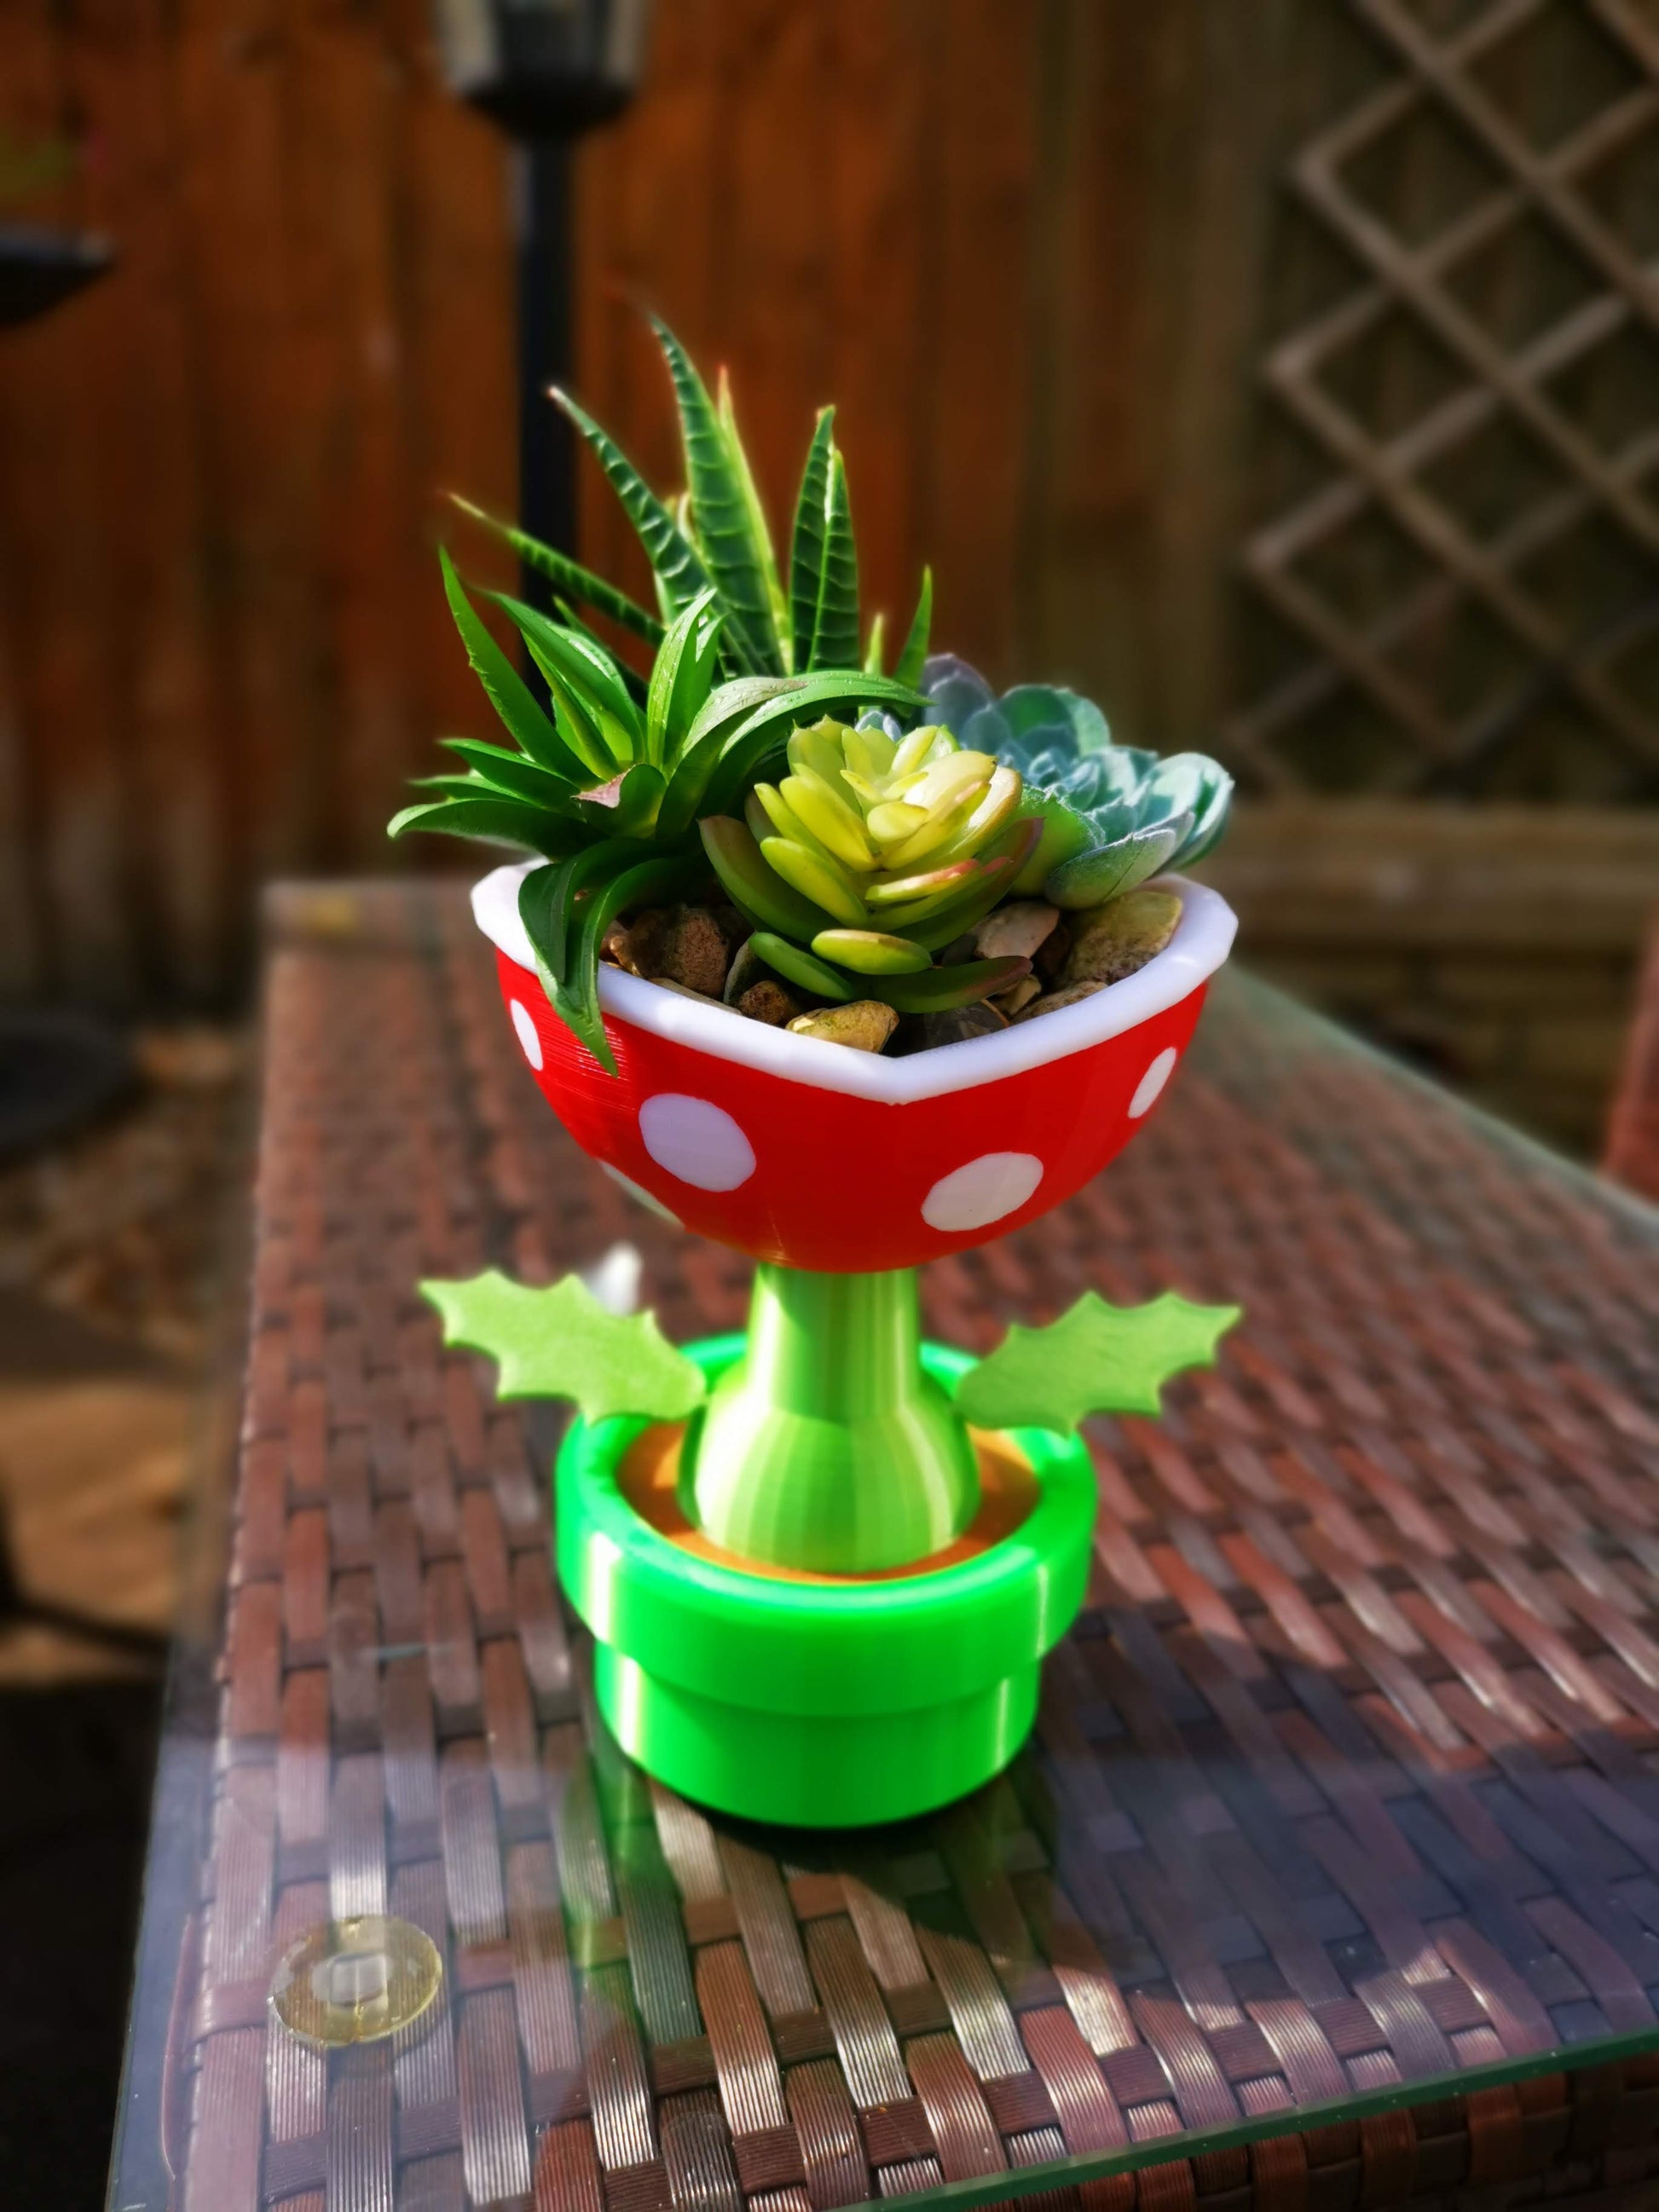 Petey Piranha planter outside on the table